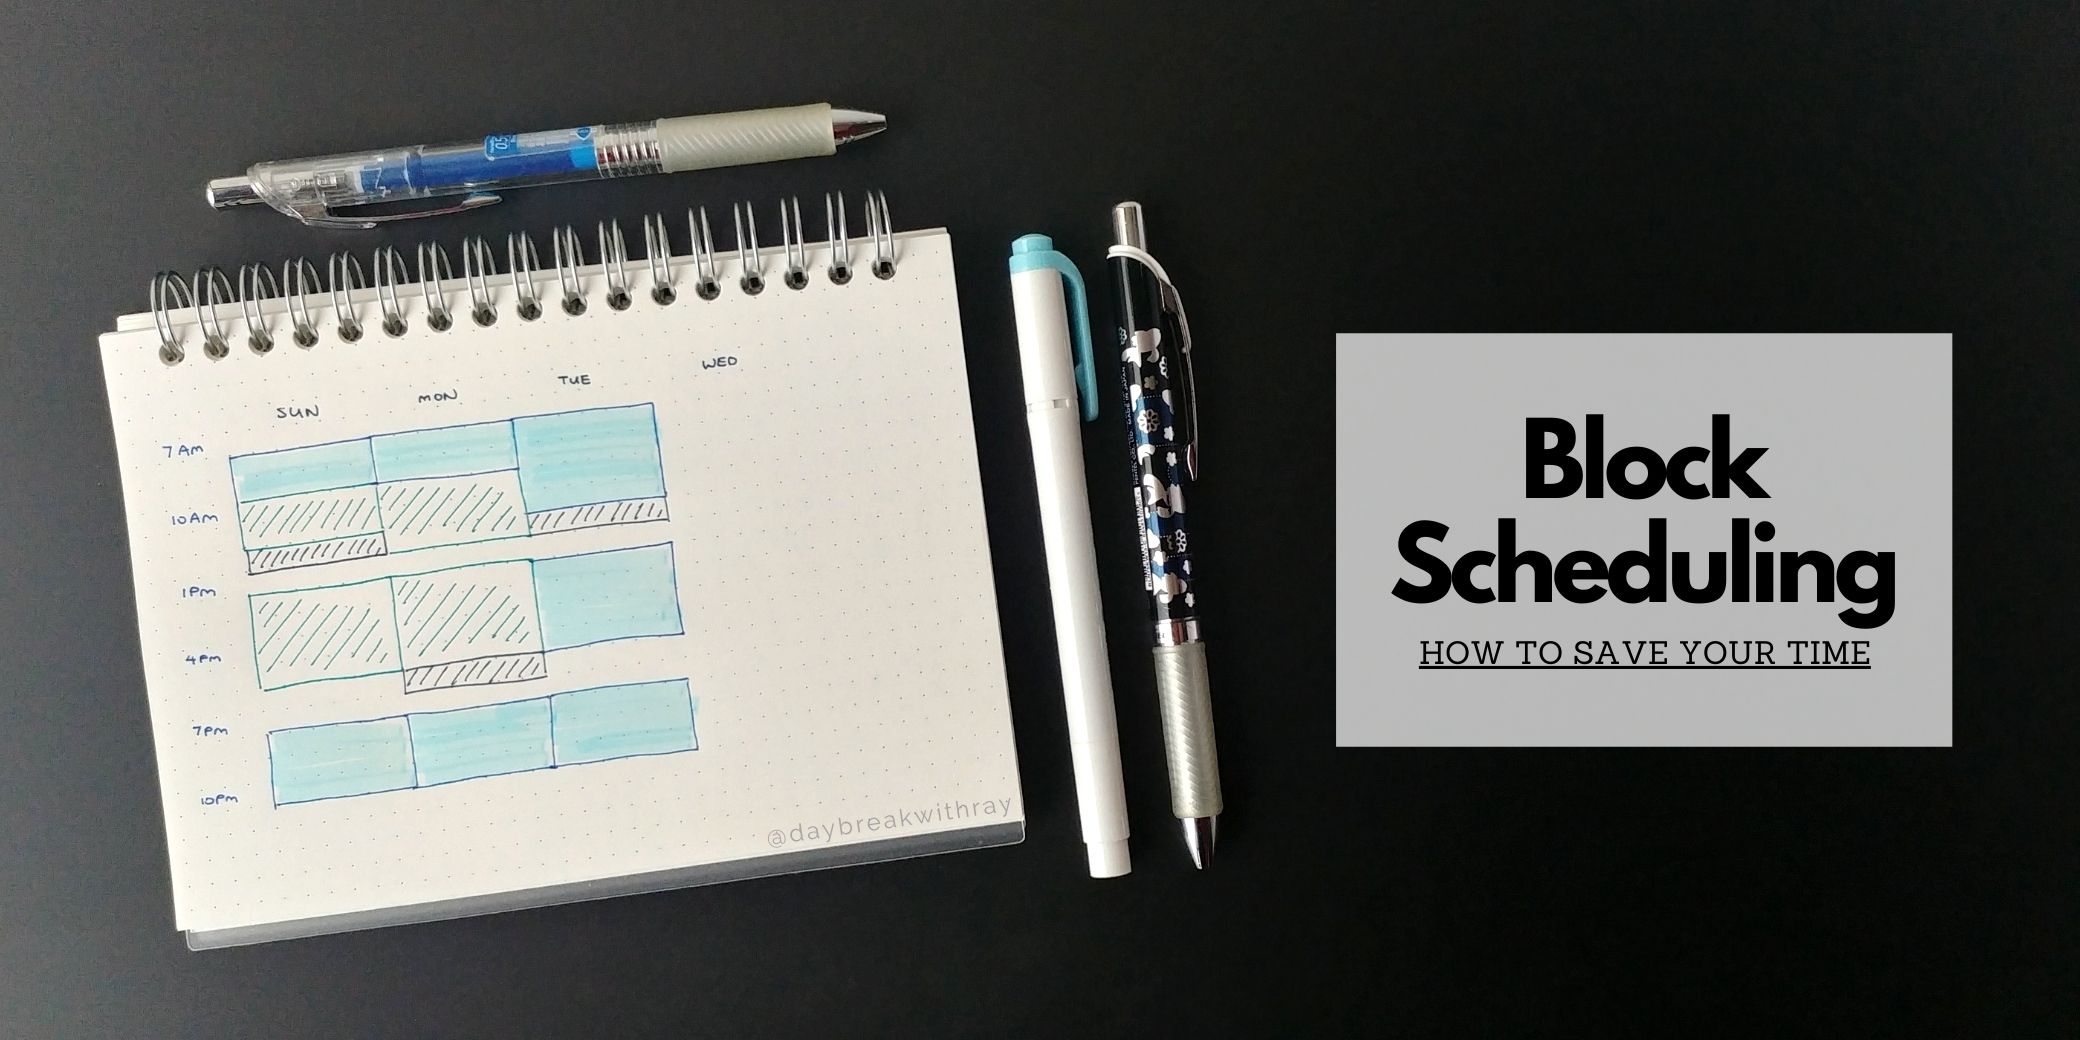 (Featured Image) How to Save Your Time with Block Scheduling